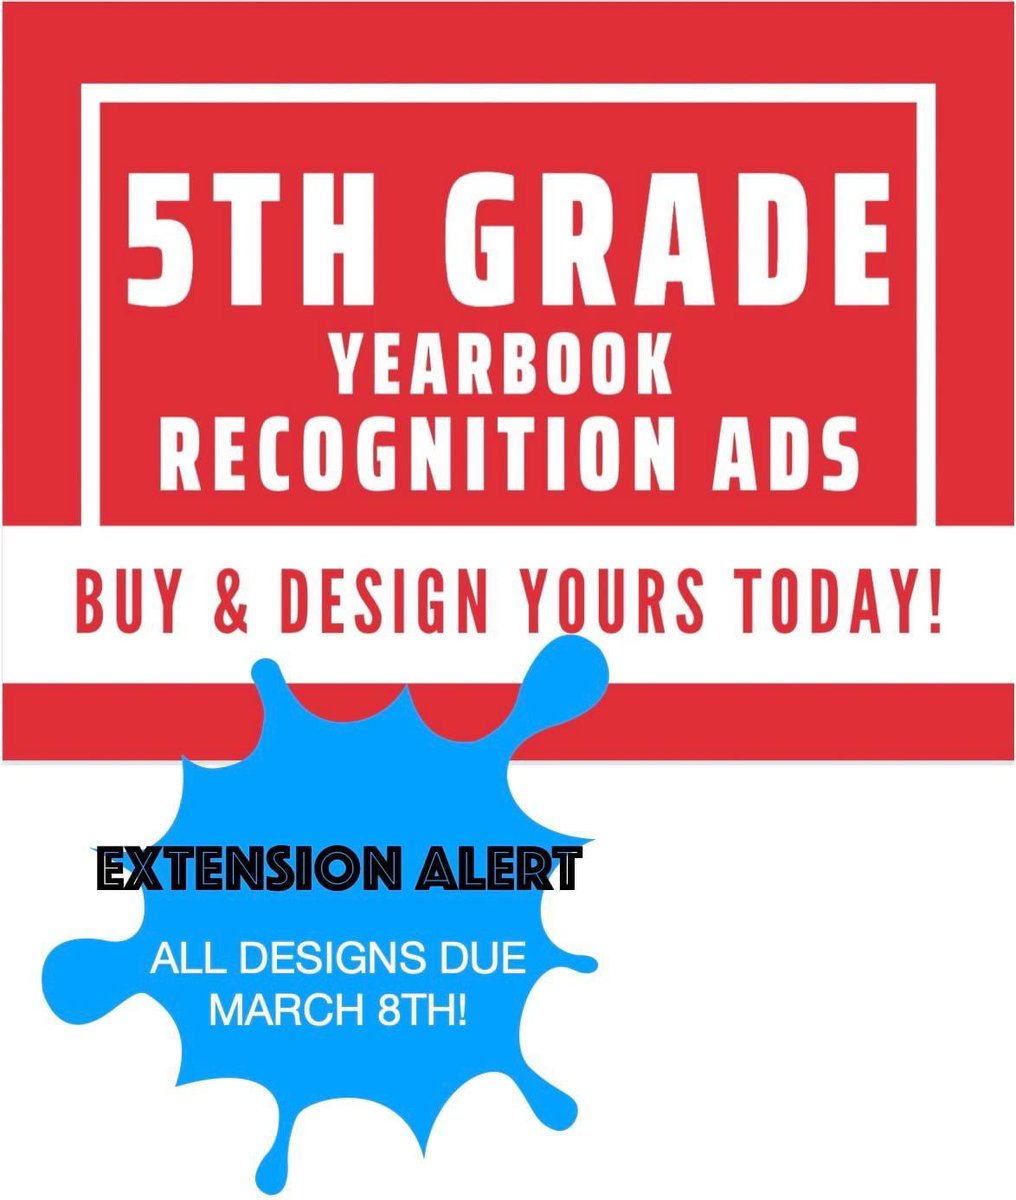 Attention 5th grade parents!! The deadline for ads in the yearbook has been extended to 3/8!! More details can be found in the 5th grade newsletter: austin5thgrade2023.blogspot.com